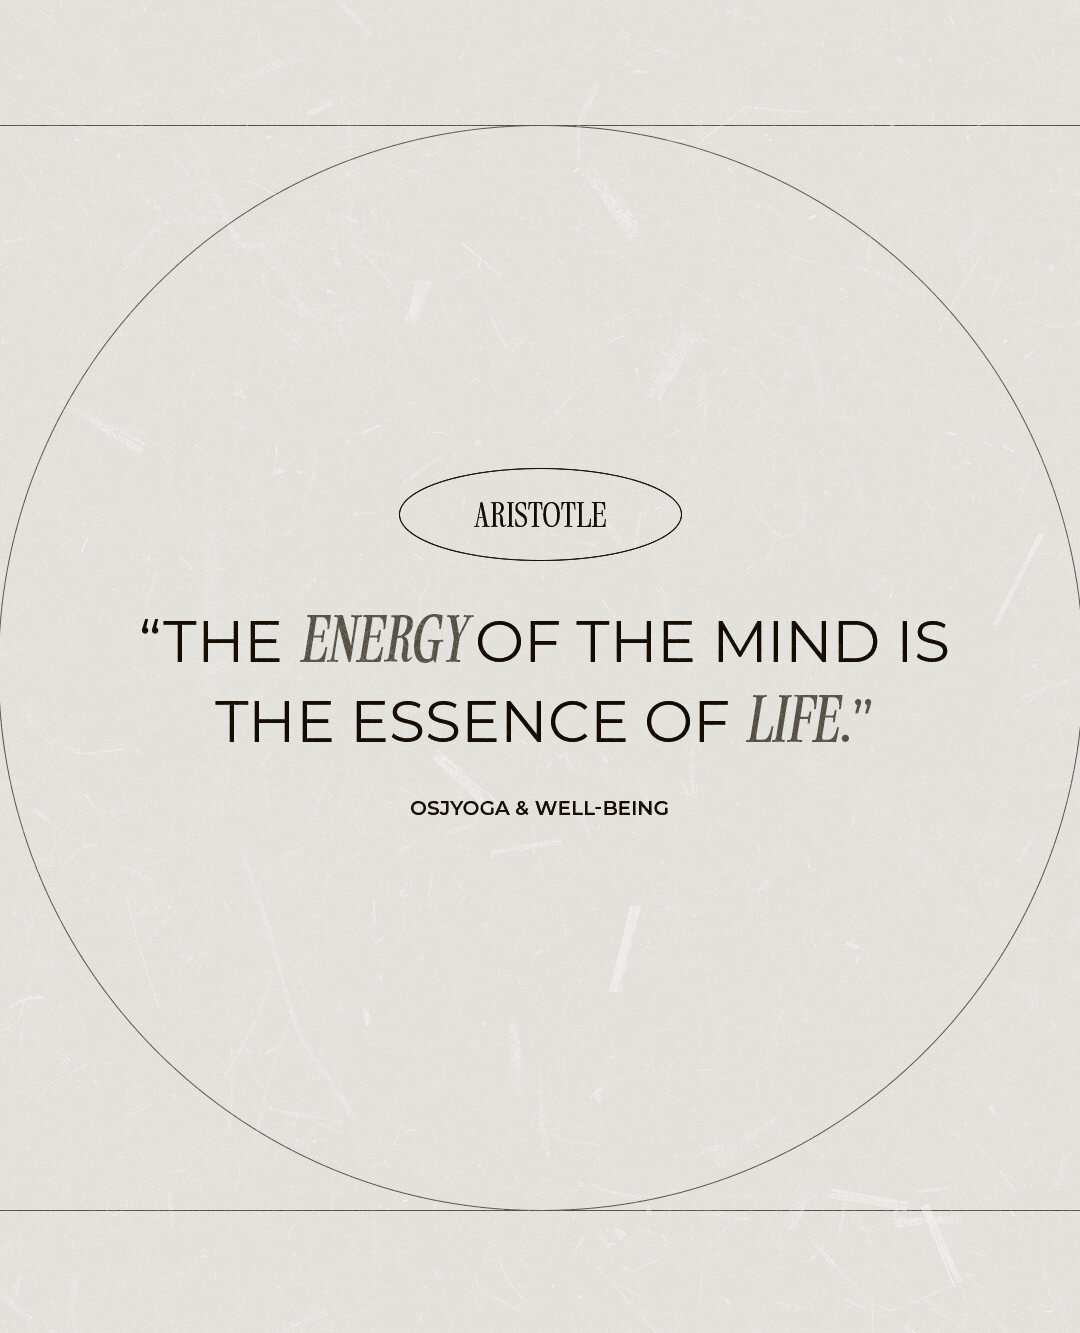 Let Aristotle's words remind us that the energy of our mind is the essence of our life. Take a moment today to pause, breathe, and connect with your inner self. 🧘&zwj;♀️📖✨✨

Investing in your mental and emotional well-being is the ultimate form of 